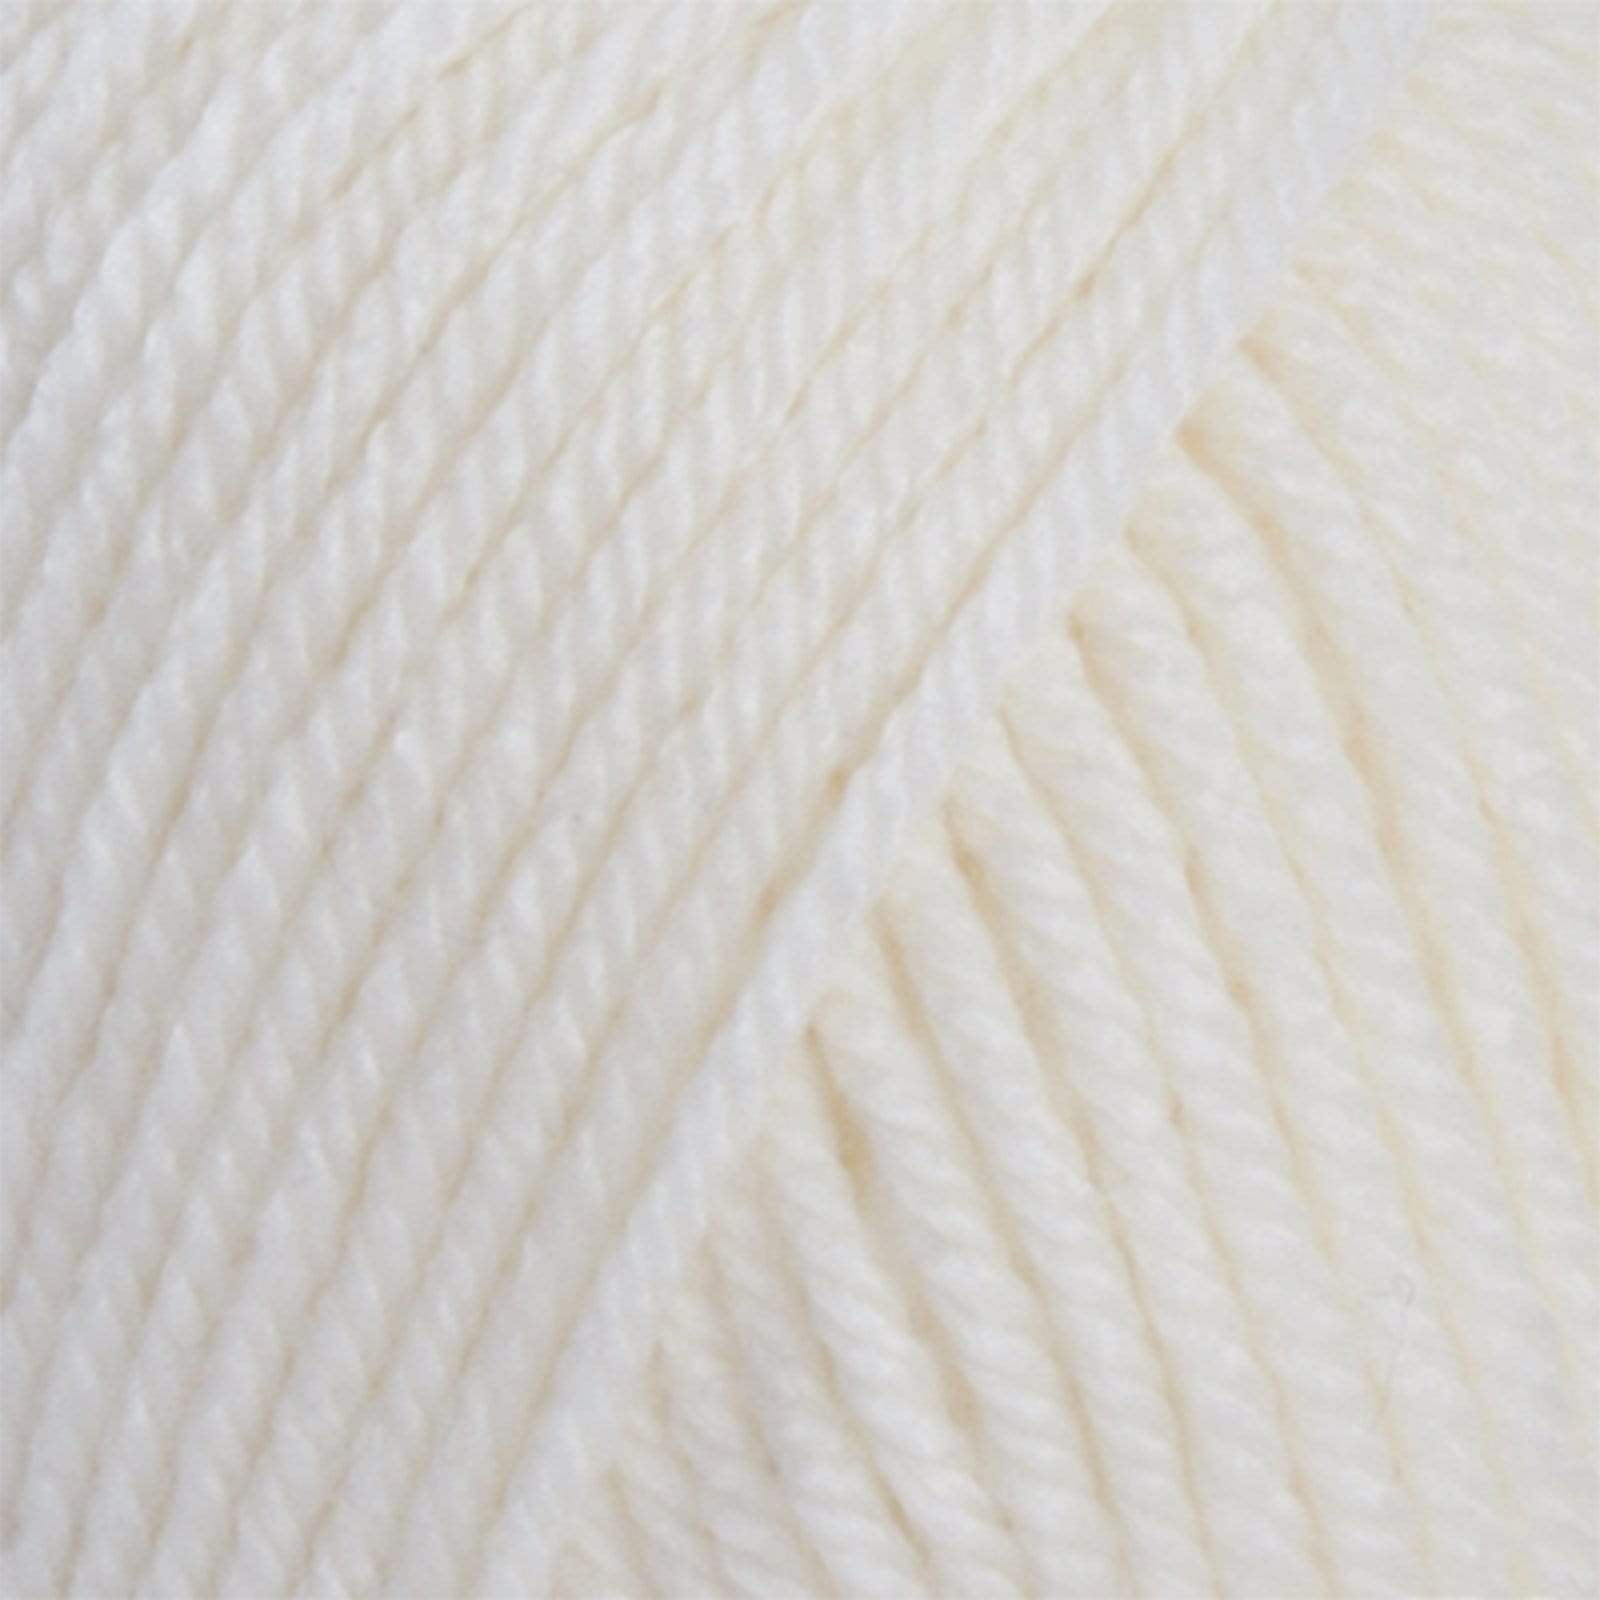  Pllieay Snowy White Cotton Yarn for Crocheting and